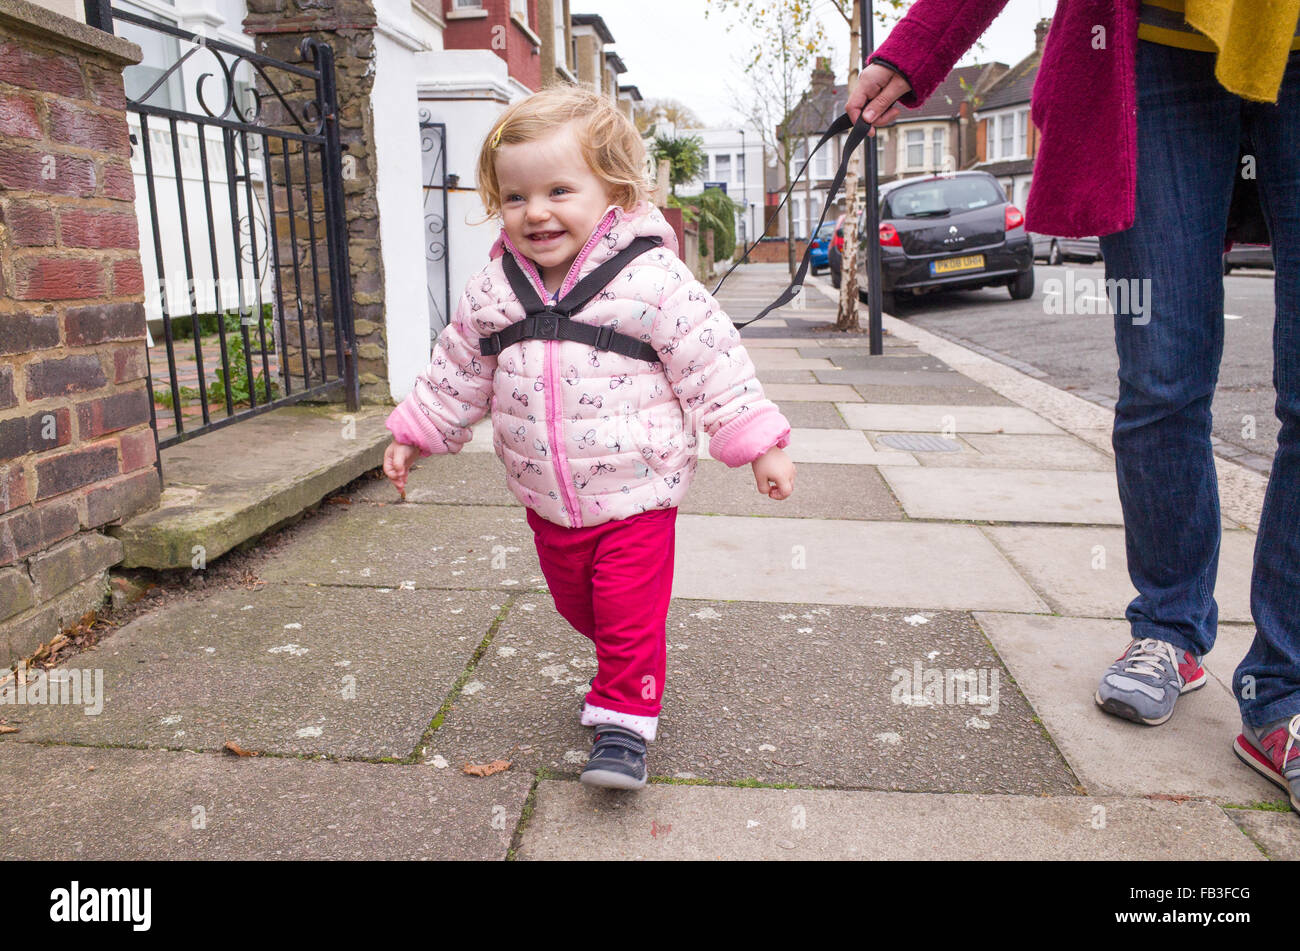 Toddler walking down the street held with a safety harness, London, UK Stock Photo